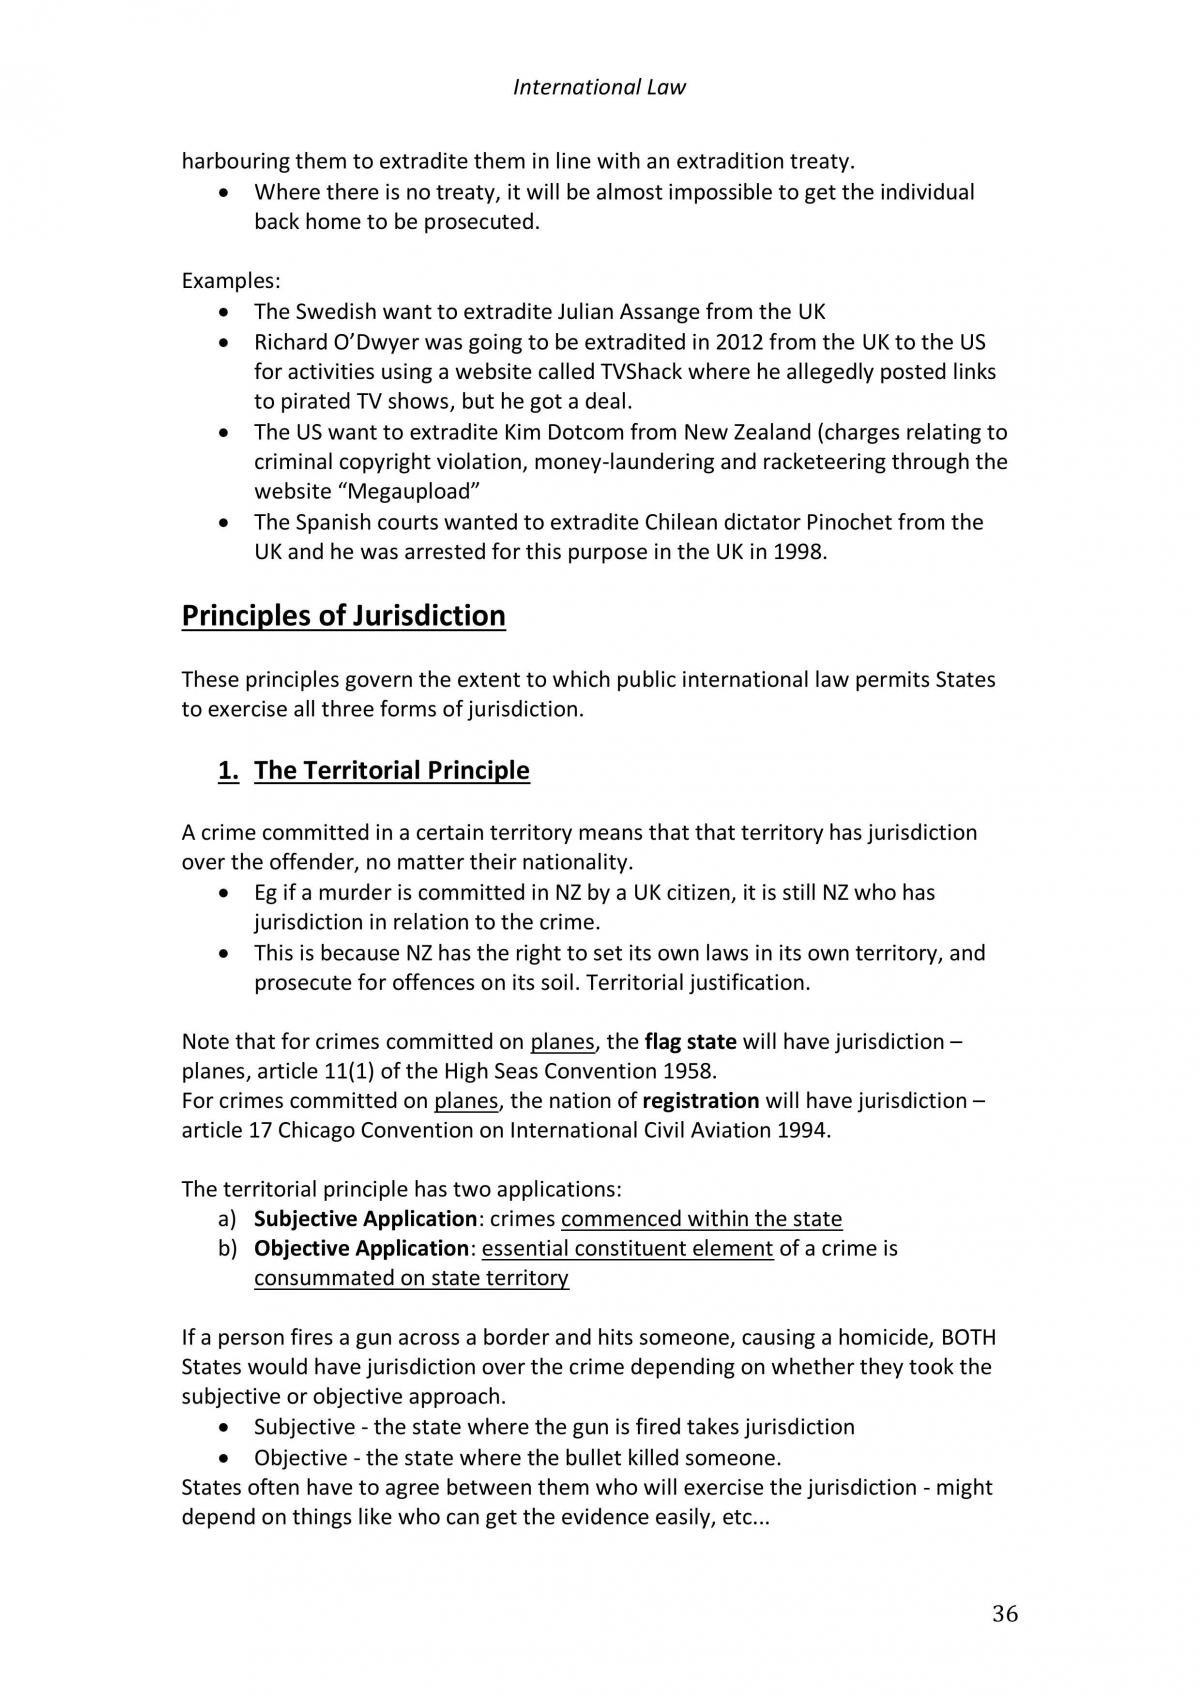 International Law full subject notes - Page 36